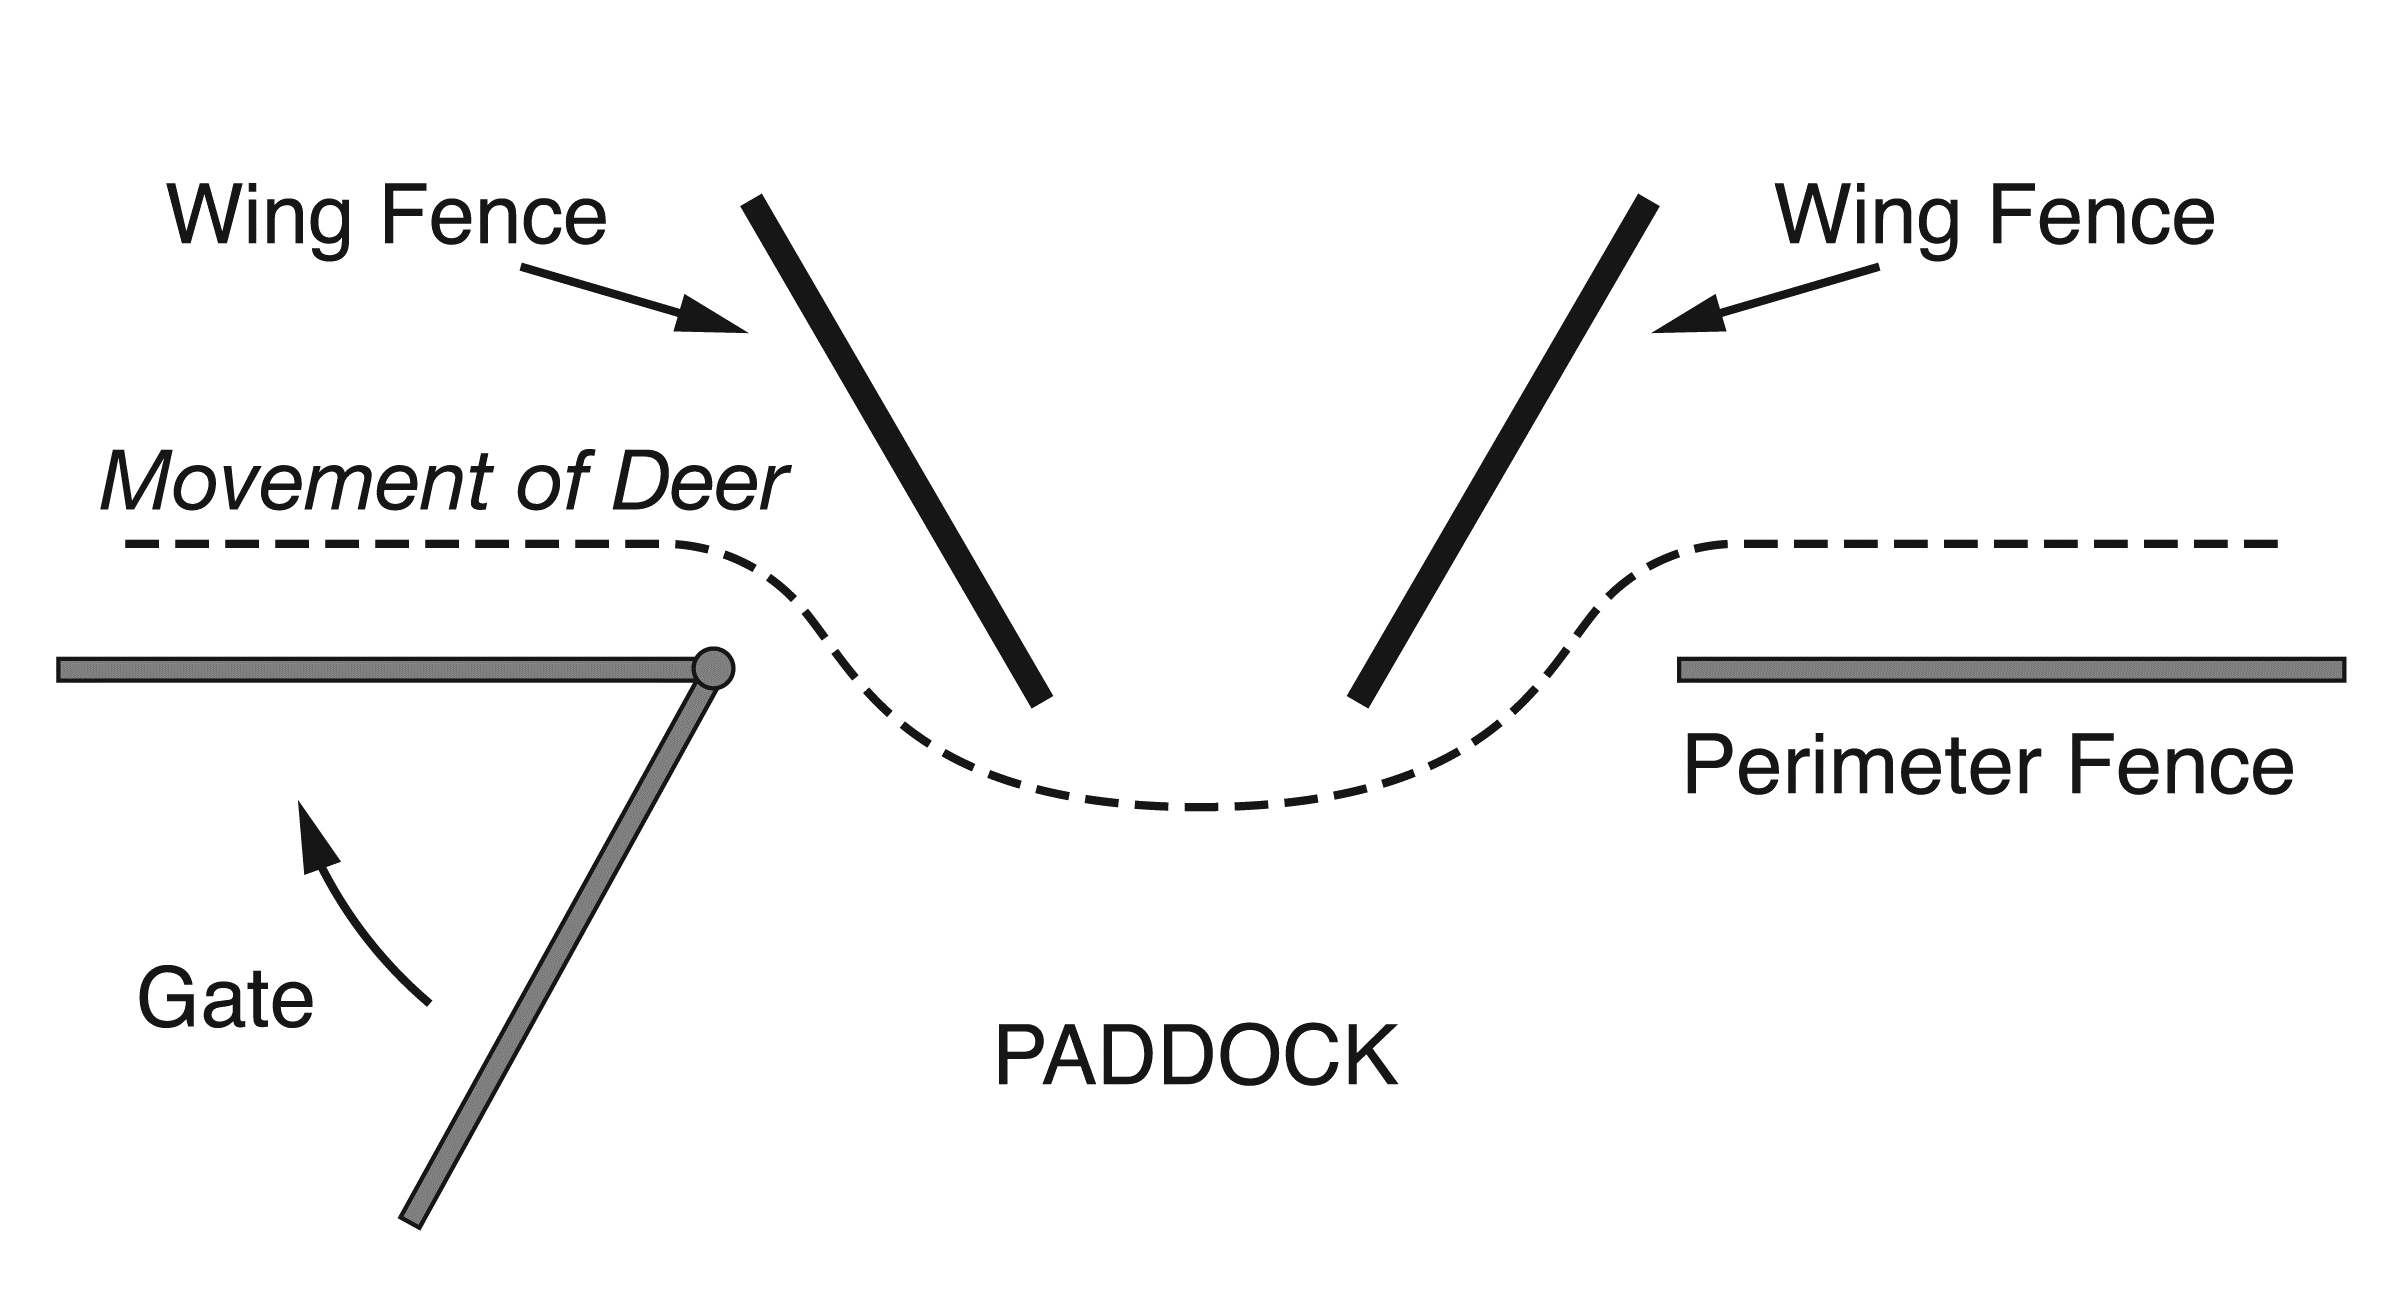 A drawing show wing fences that do not extend far enough into the paddock that the deer may enter along one wing fence and exit out along the other wing fence.